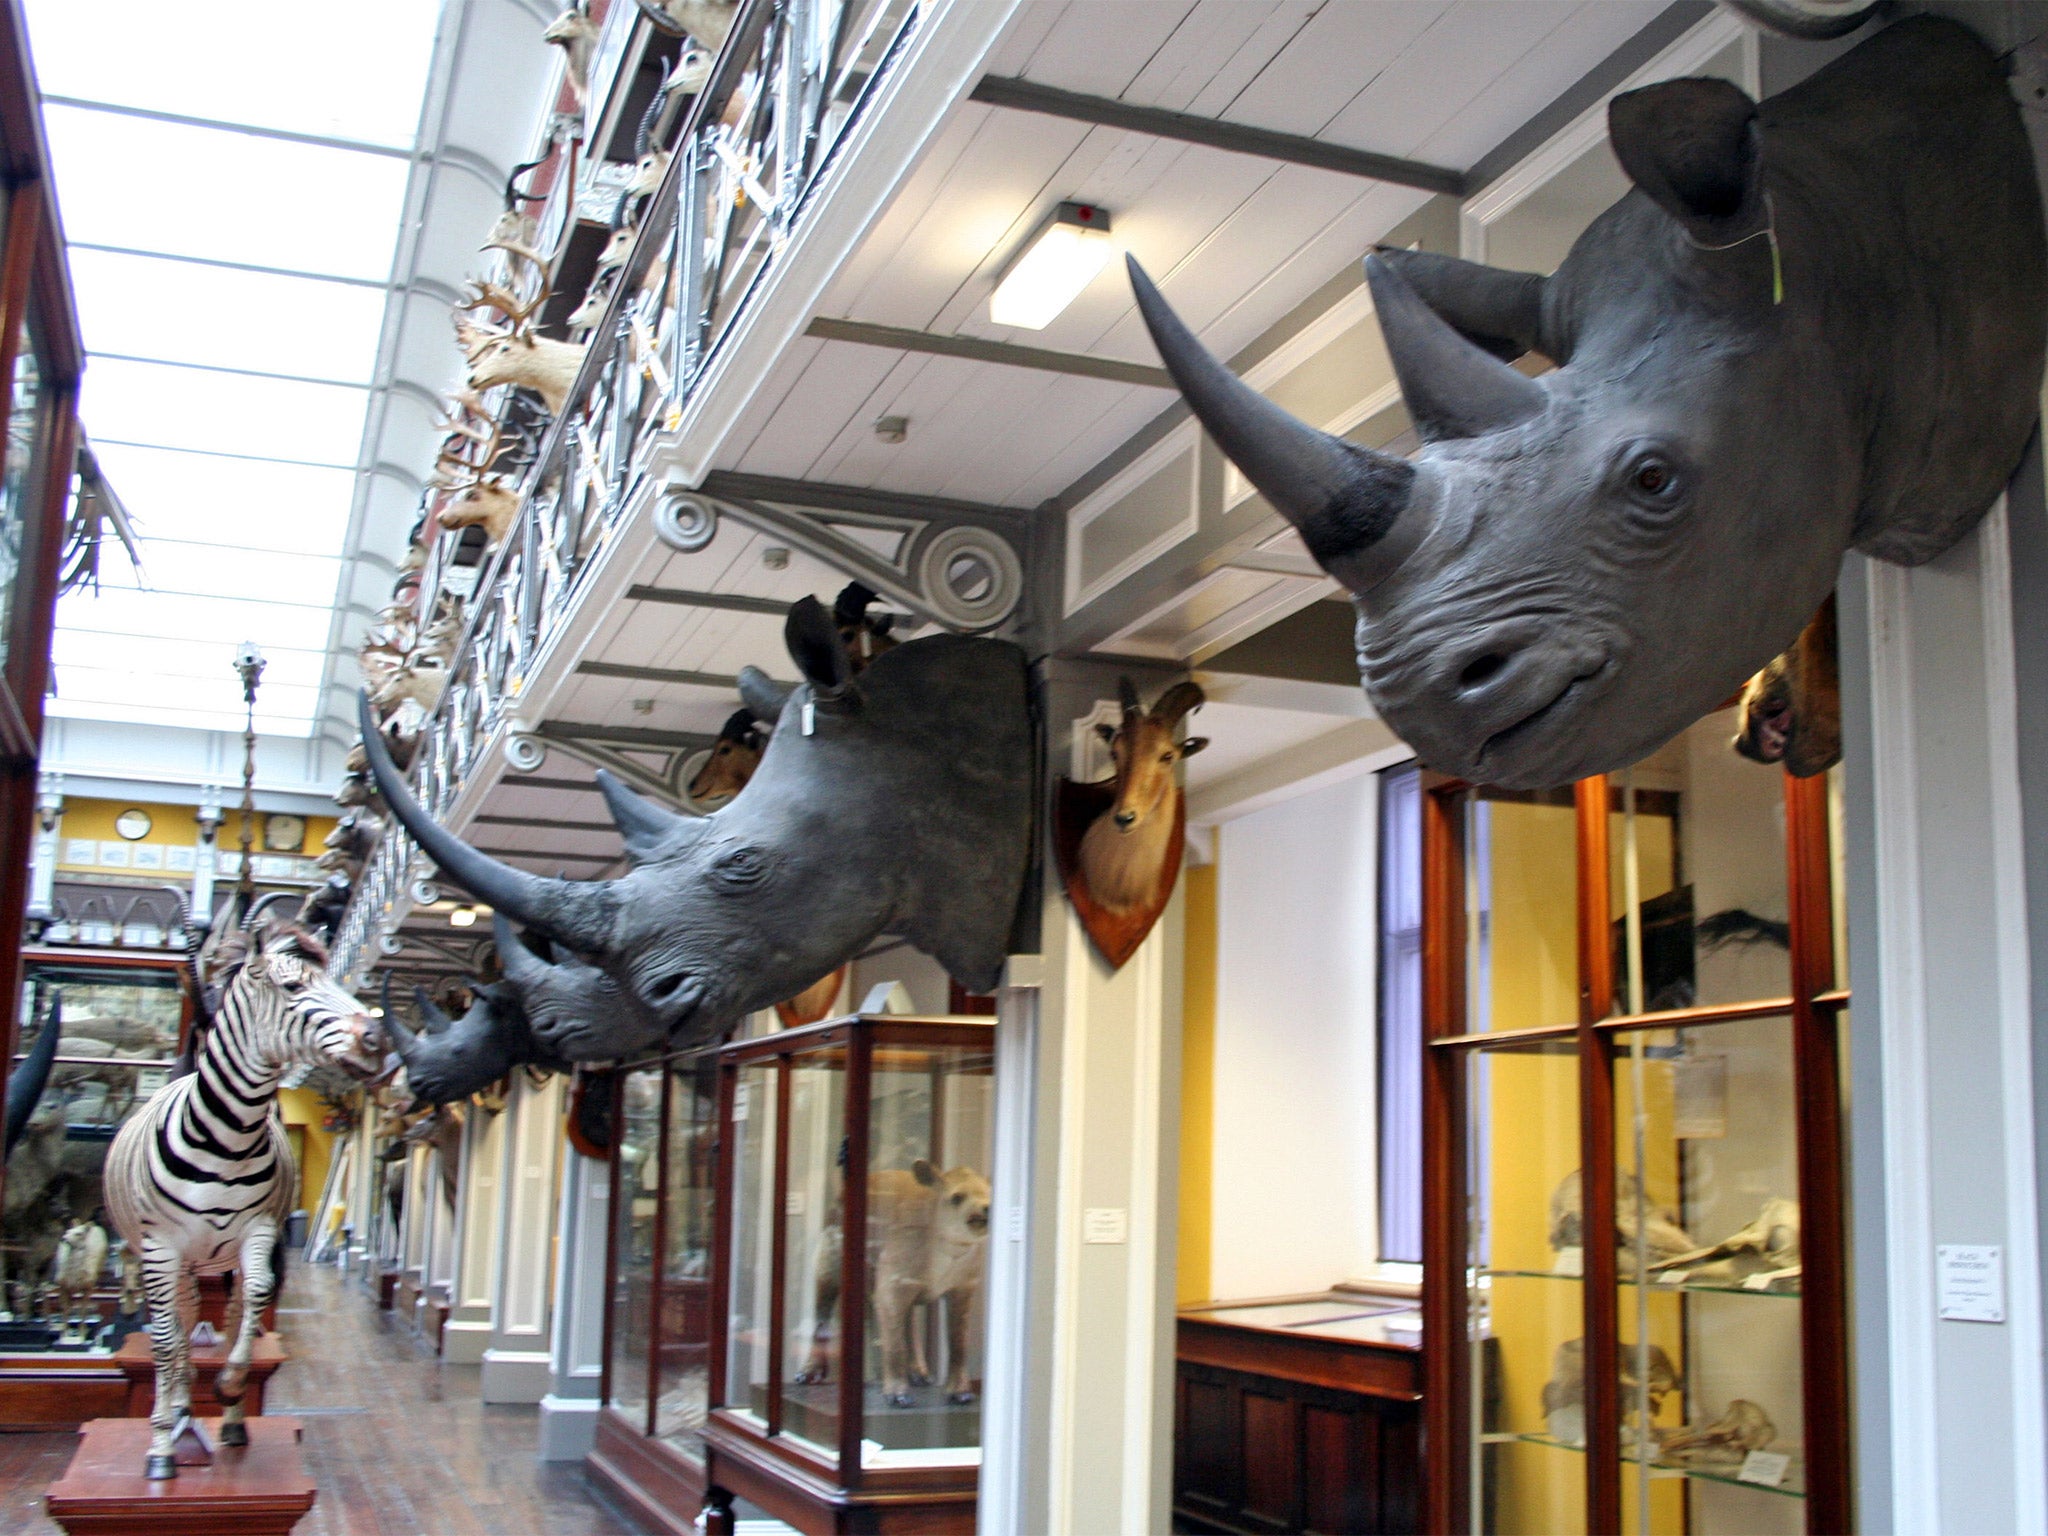 The Rathkeale Rovers cartel stole rhino heads worth £428,000 from storage in Ireland